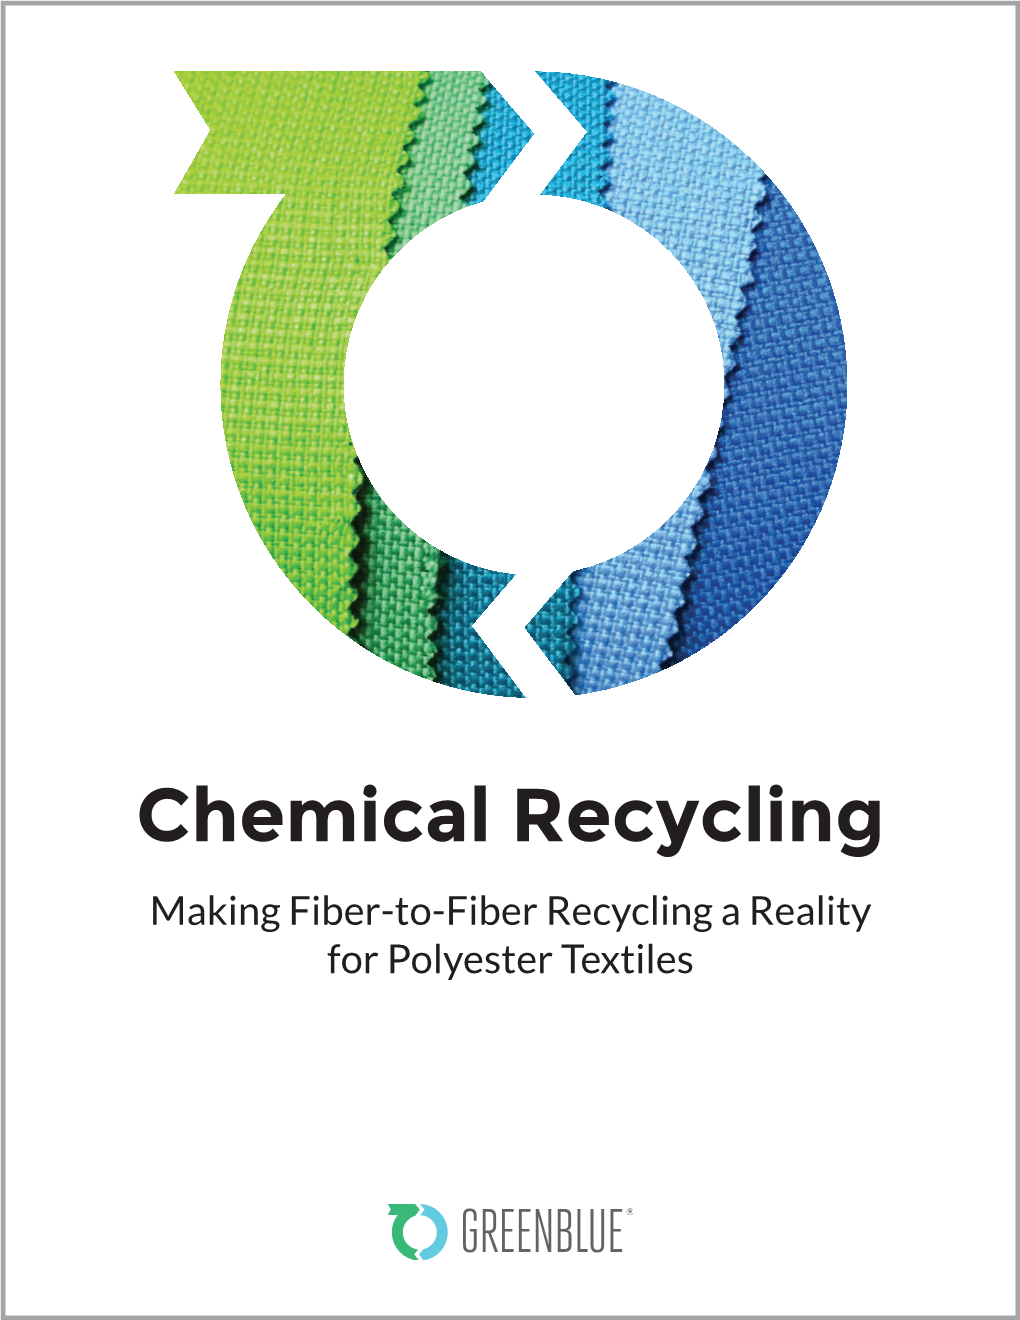 Chemical Recycling Making Fiber-To-Fiber Recycling a Reality for Polyester Textiles ACKNOWLEDGEMENTS